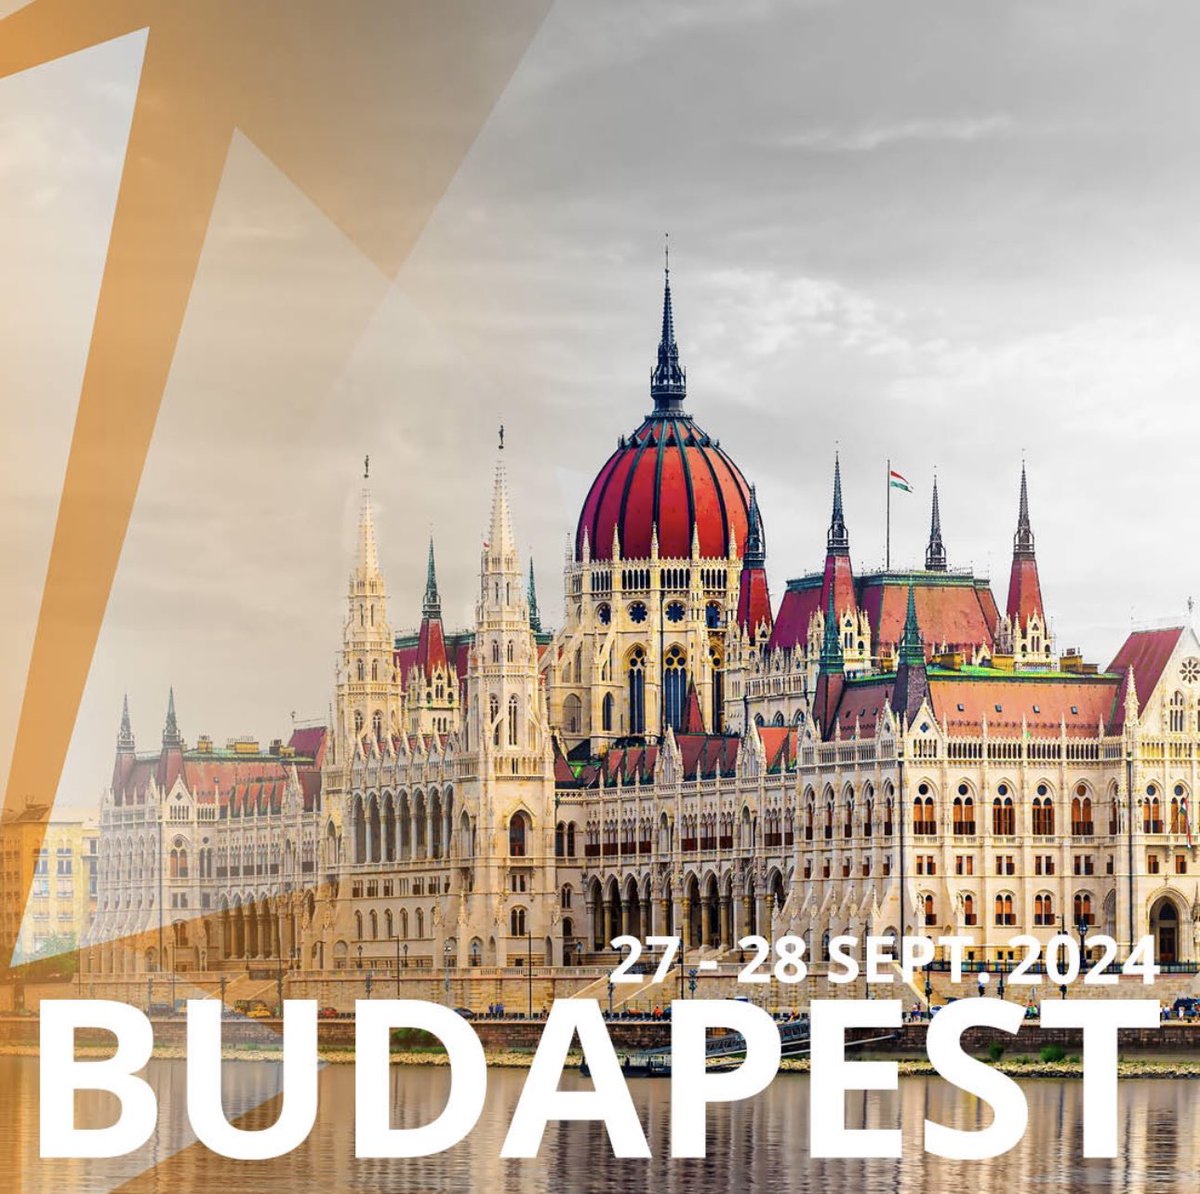 BIG NEWS: Lyconet Elite Seminar 2024 comes to Budapest! Say hello to the beautiful, historic city of Budapest! 4# Join us at the Lyconet Elite Seminar 2024 from 27-28 September.